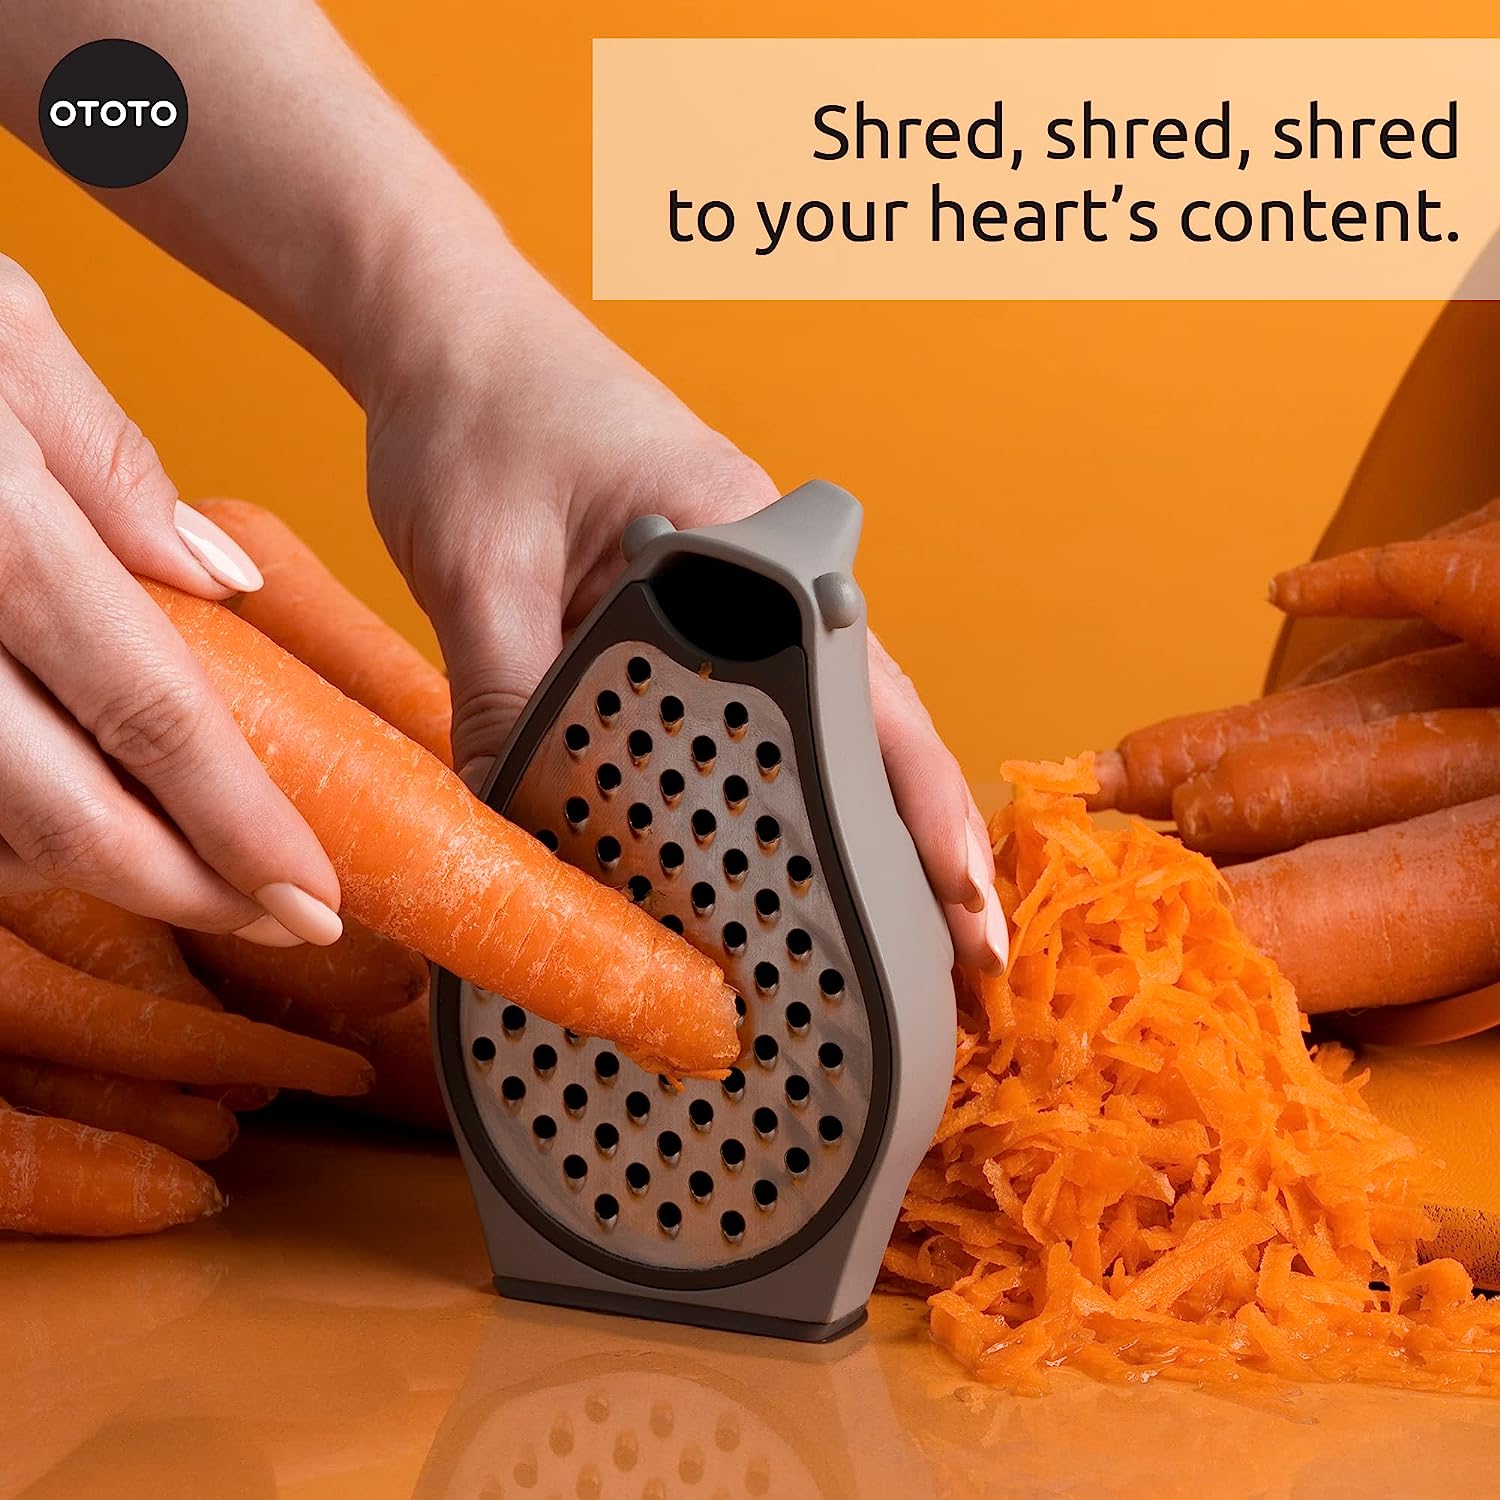 A person is shredding a carrot using a bear-shaped grater.